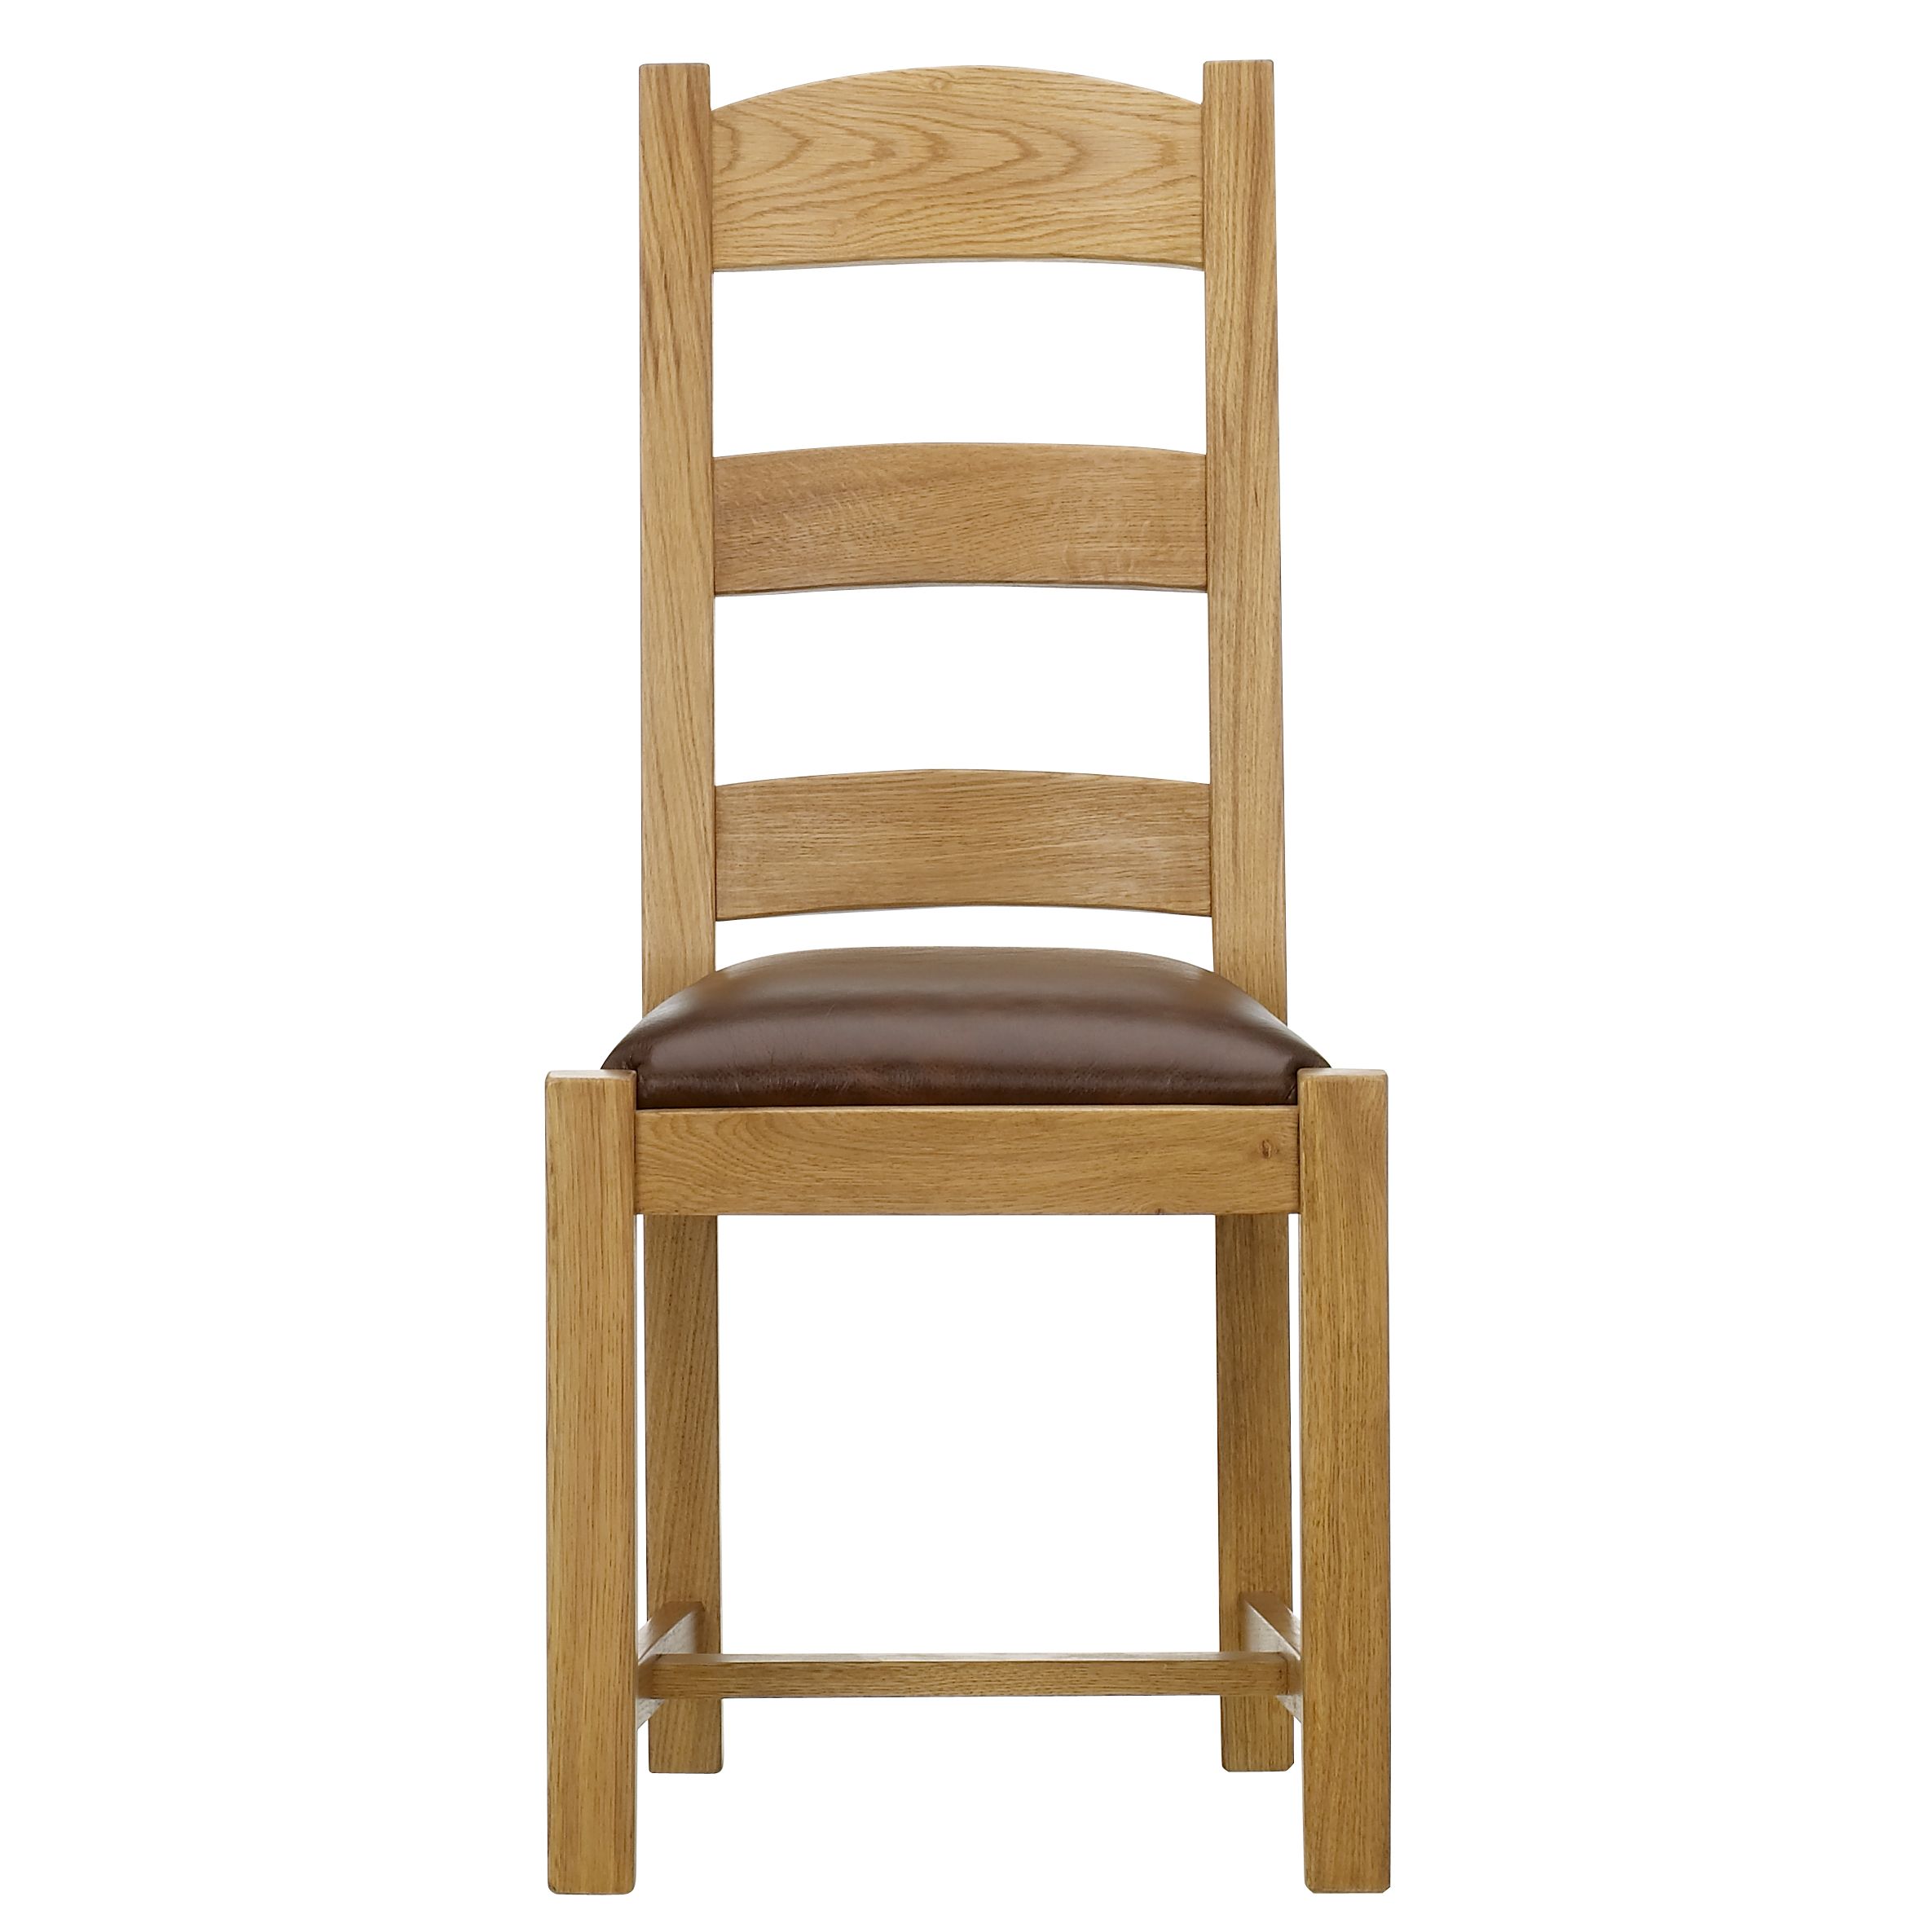 John Lewis Ardennes Leather Dining Chair, Sarlat